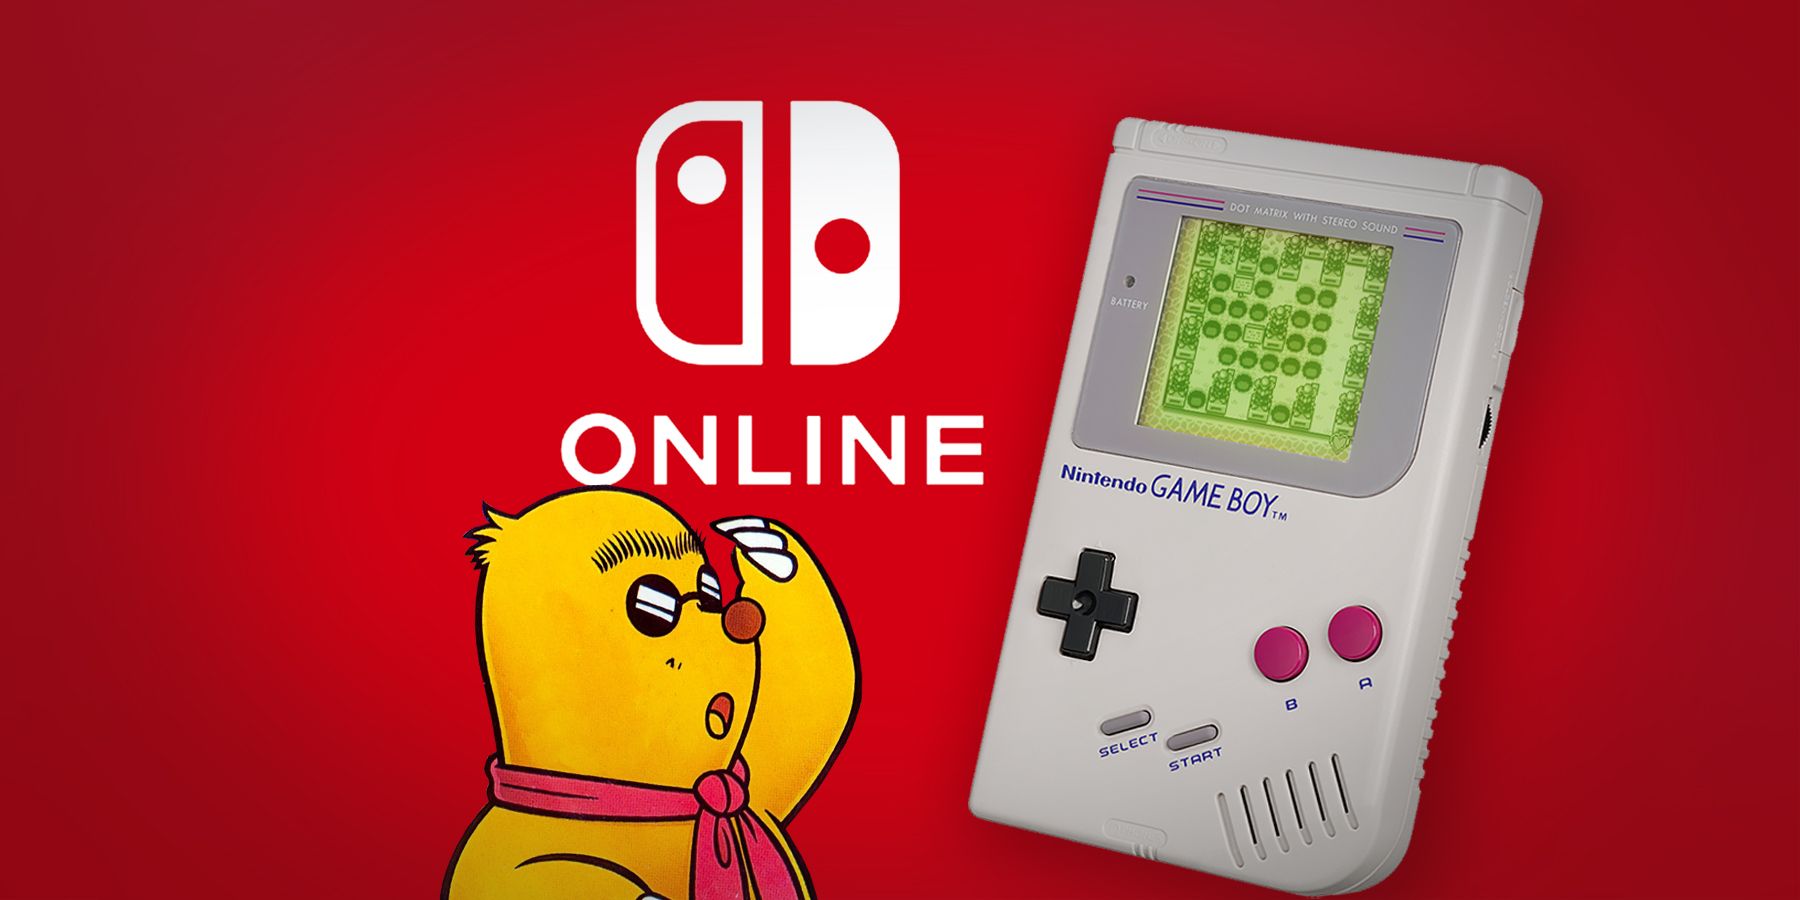 You can now play Game Boy games on Nintendo Switch